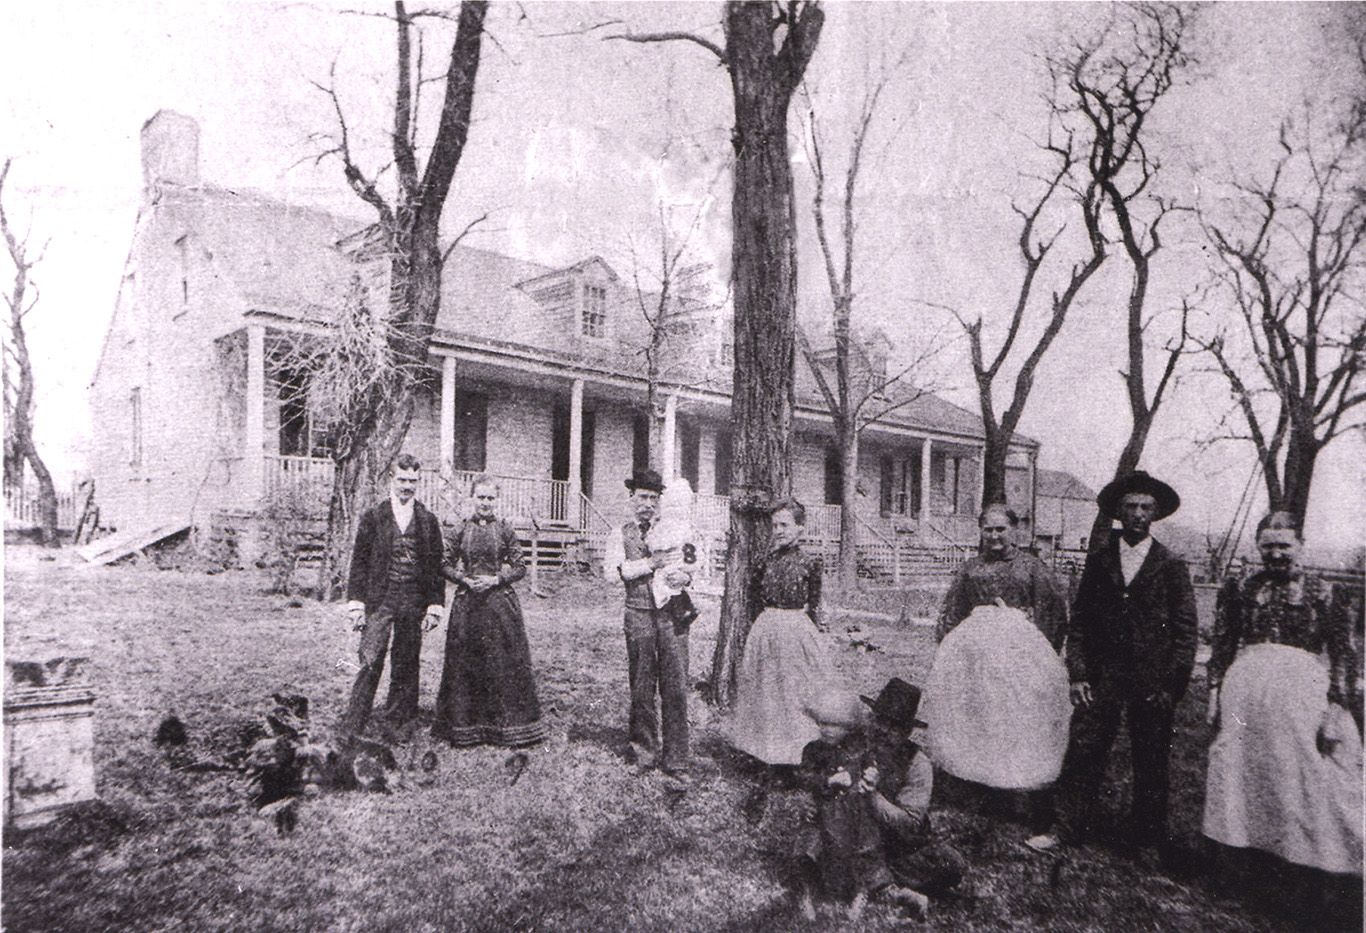 Maplewood History: James C. Sutton’s Mansion with a Surprise Ending